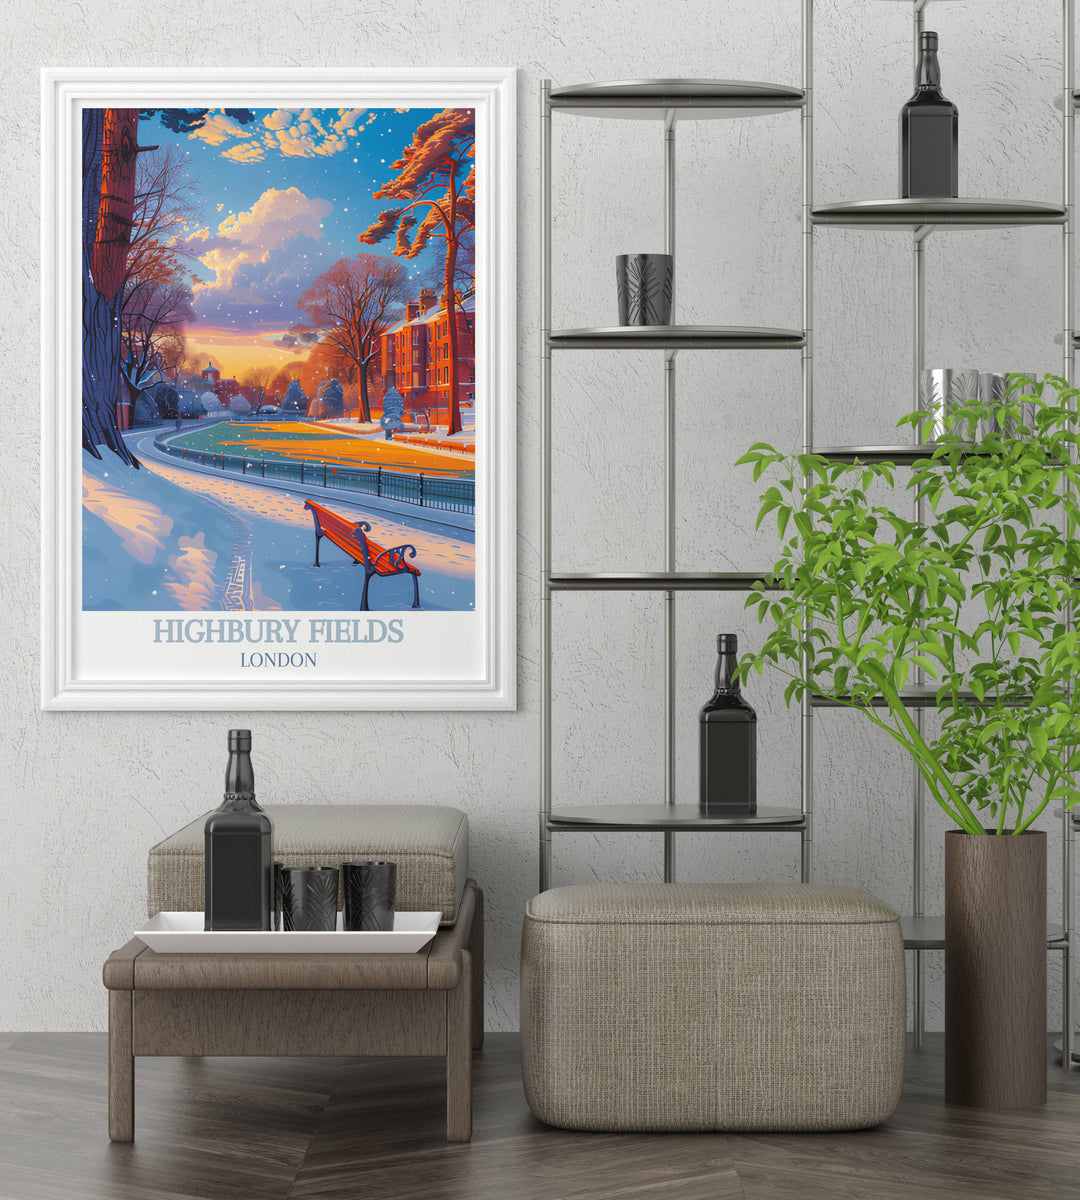 Vintage poster of Highbury Fields park with an artistic rendition of quiet snowy days, adding a serene touch to wall collections